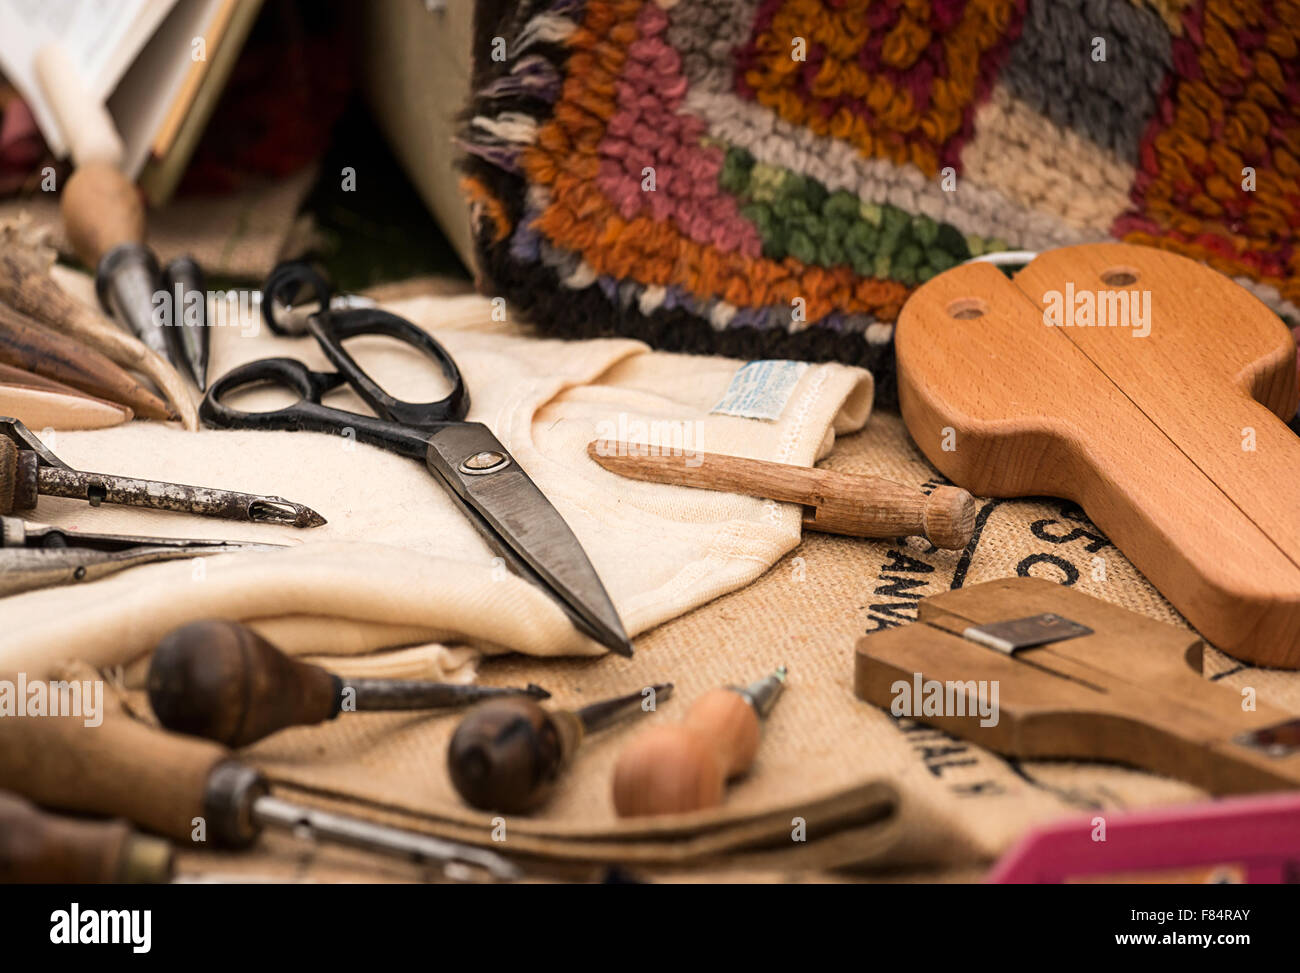 Selection of traditional tools used in the craft of carpet weaving by hand Stock Photo